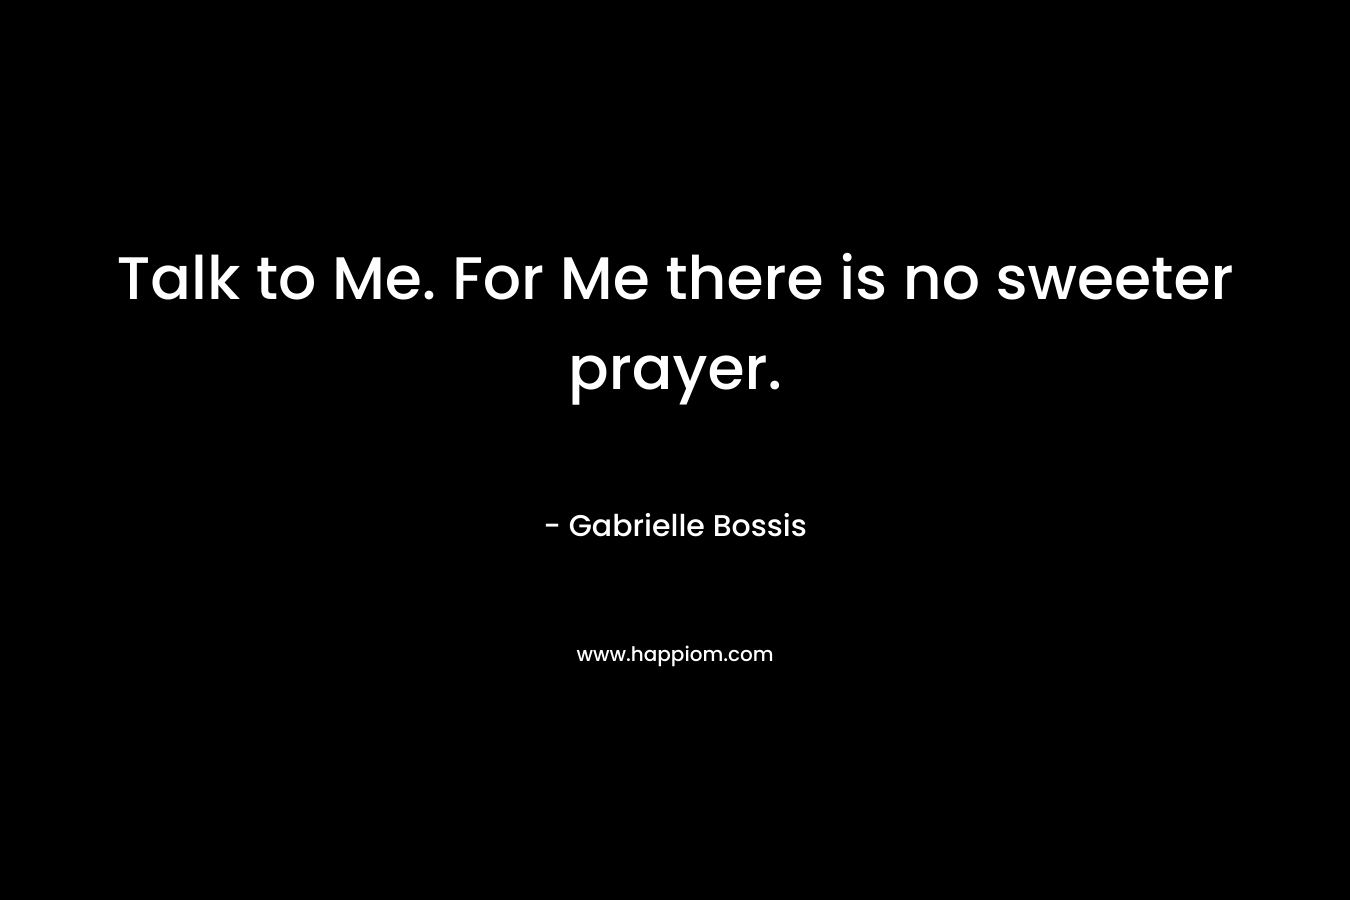 Talk to Me. For Me there is no sweeter prayer. – Gabrielle Bossis